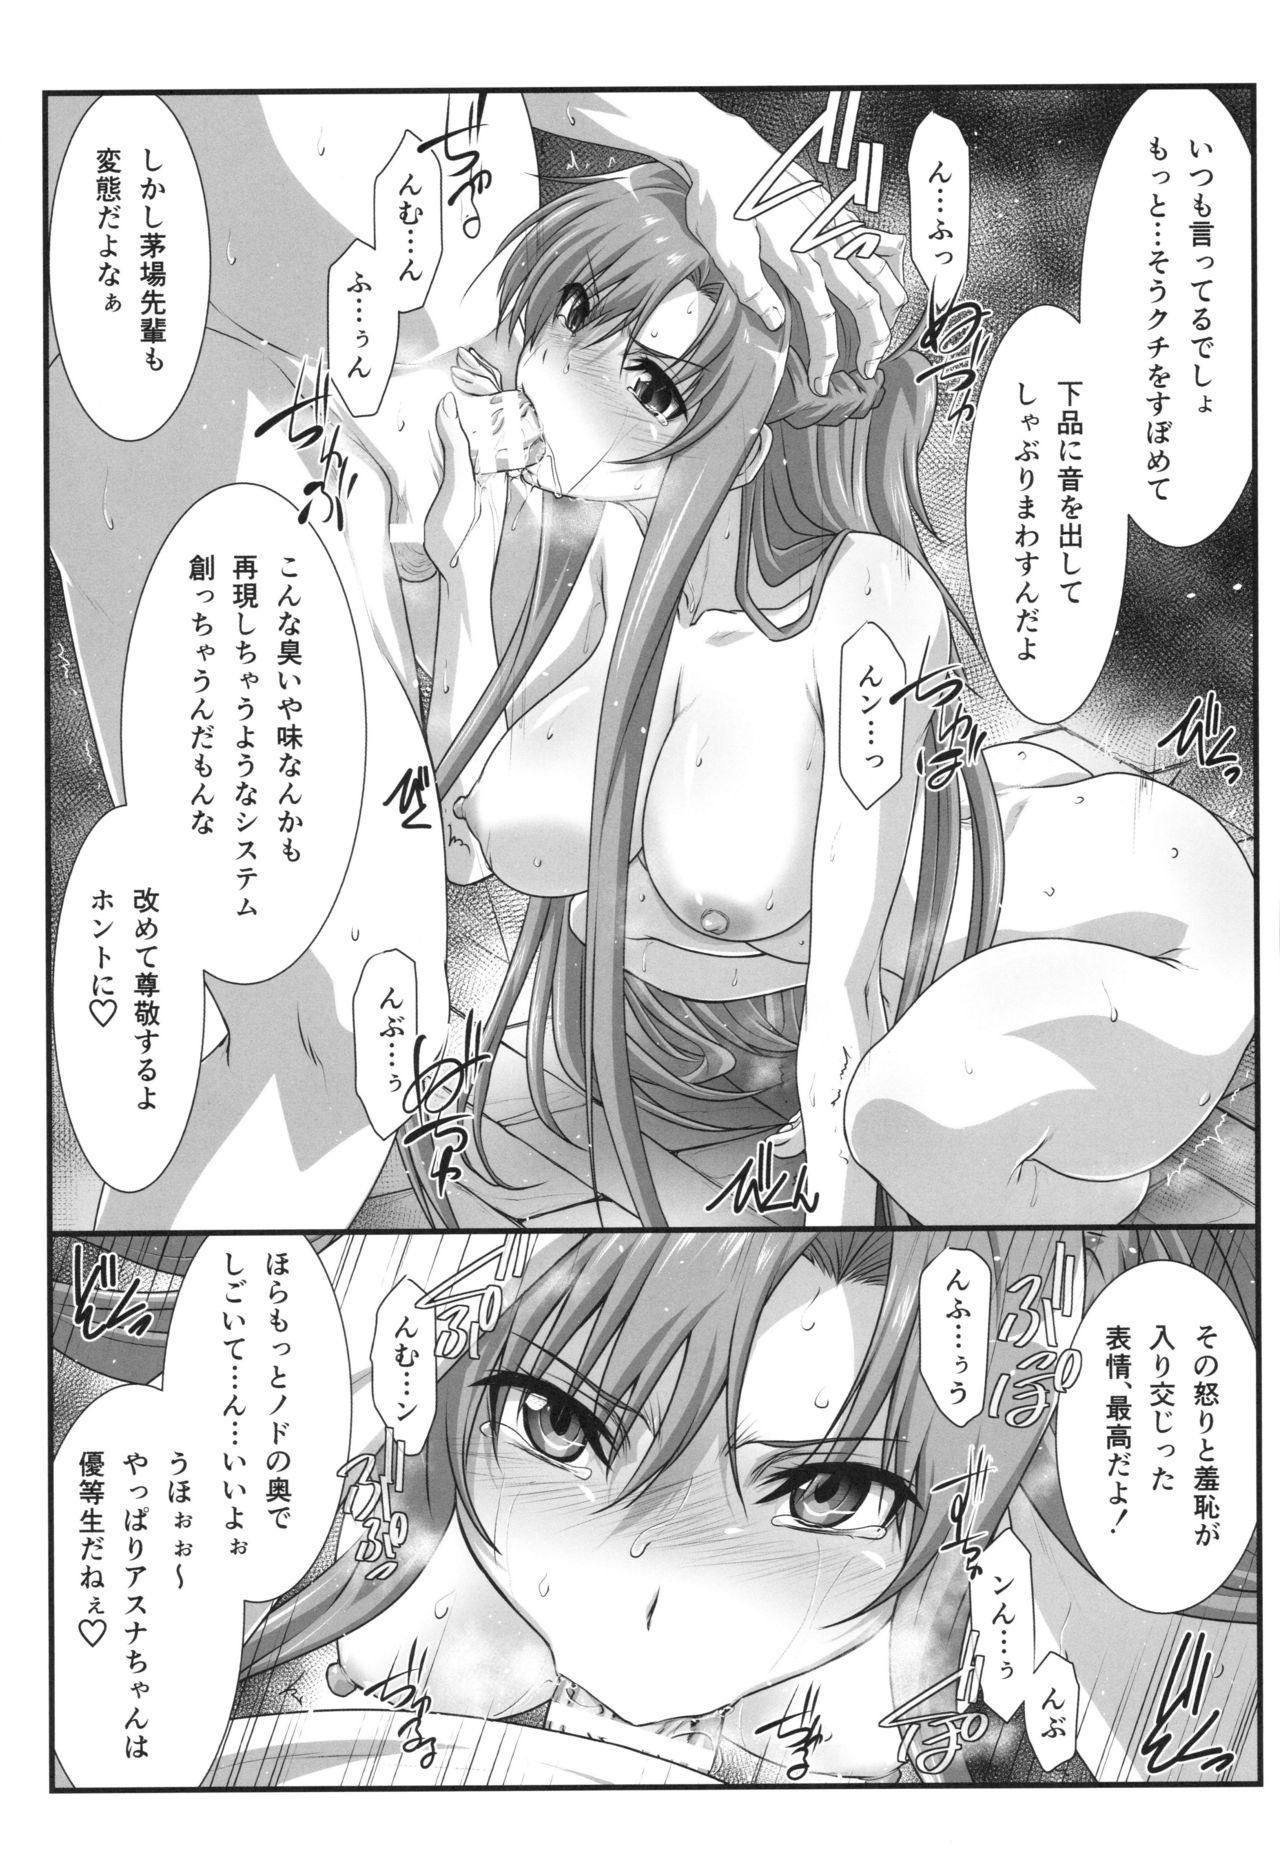 Thylinh Astral Bout Ver. 41 - Sword art online Sex - Page 6